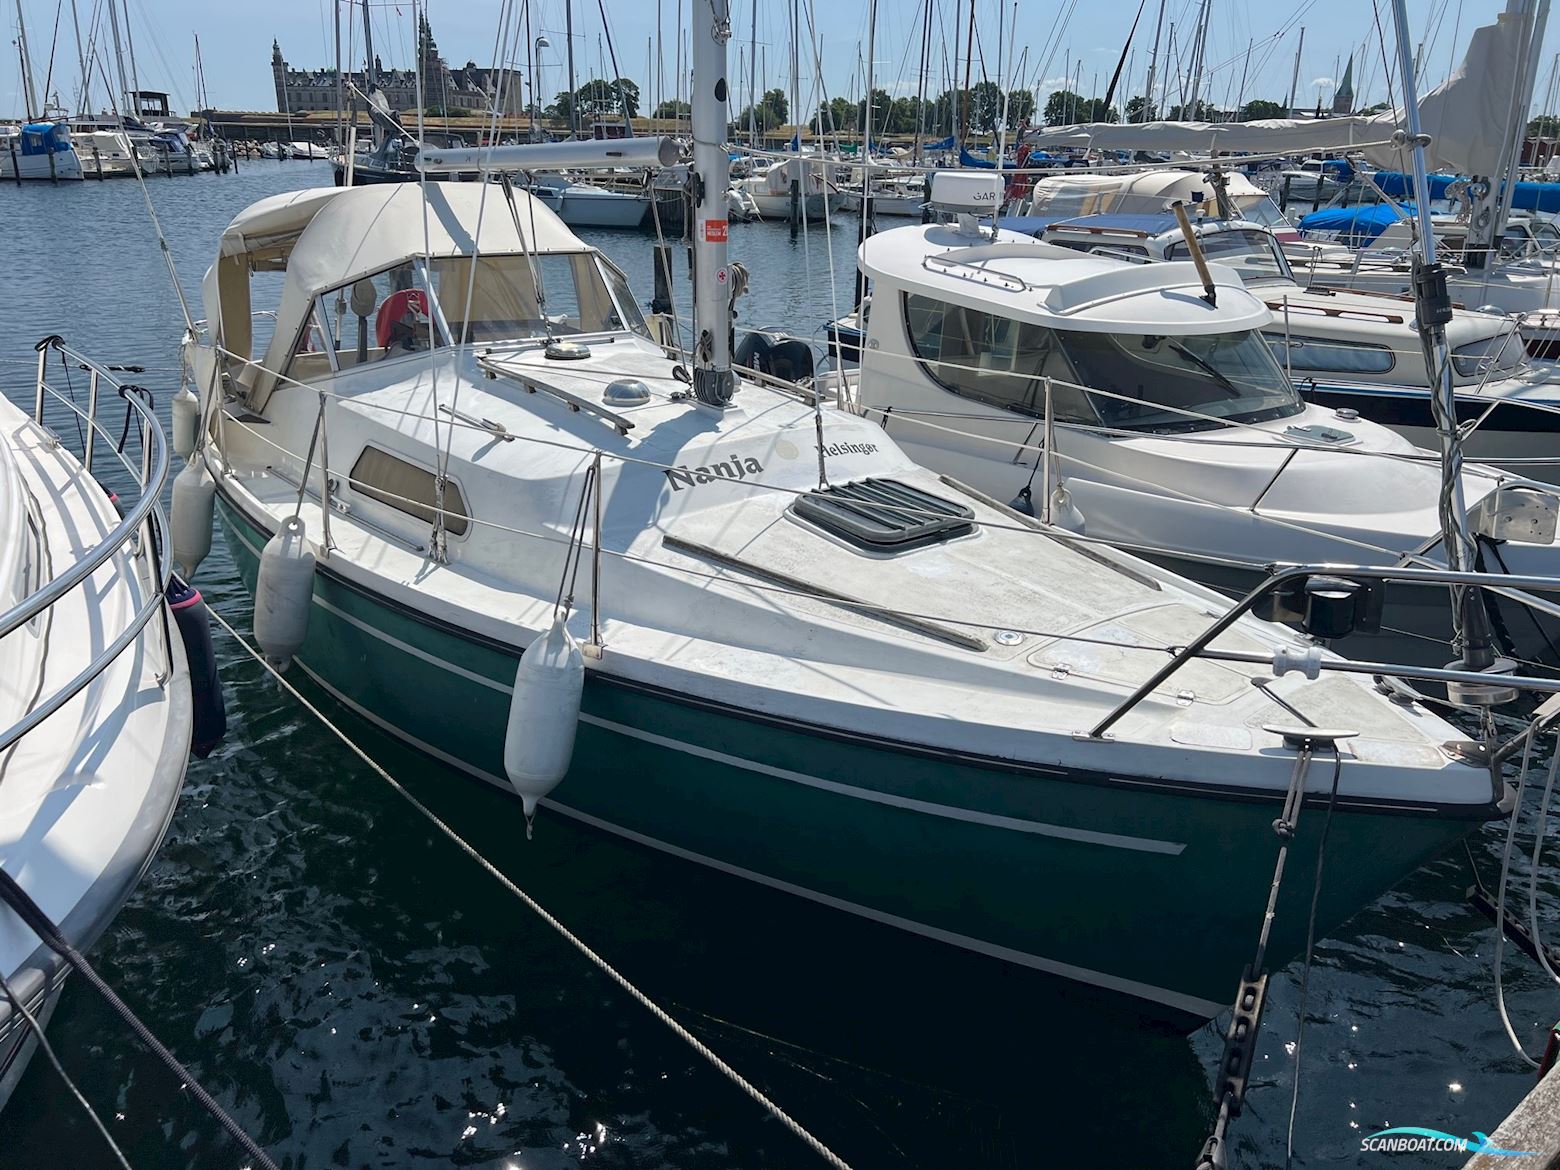 Parant 25 nr. 14 Sailing boat 1975, with Yanmar engine, Denmark